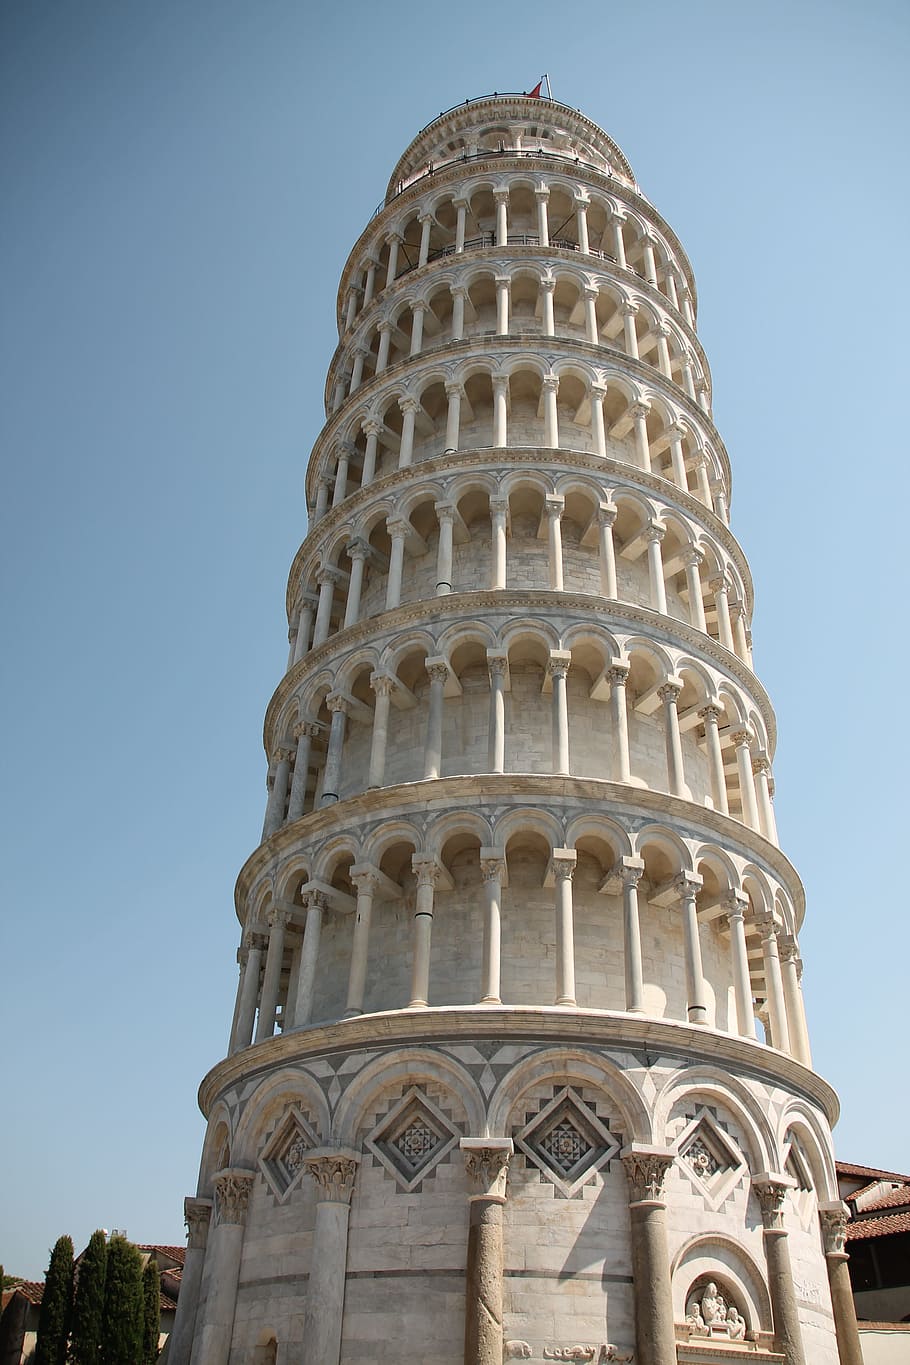 tower, pisa, statue, monument, italy, architecture, built structure, building exterior, low angle view, sky